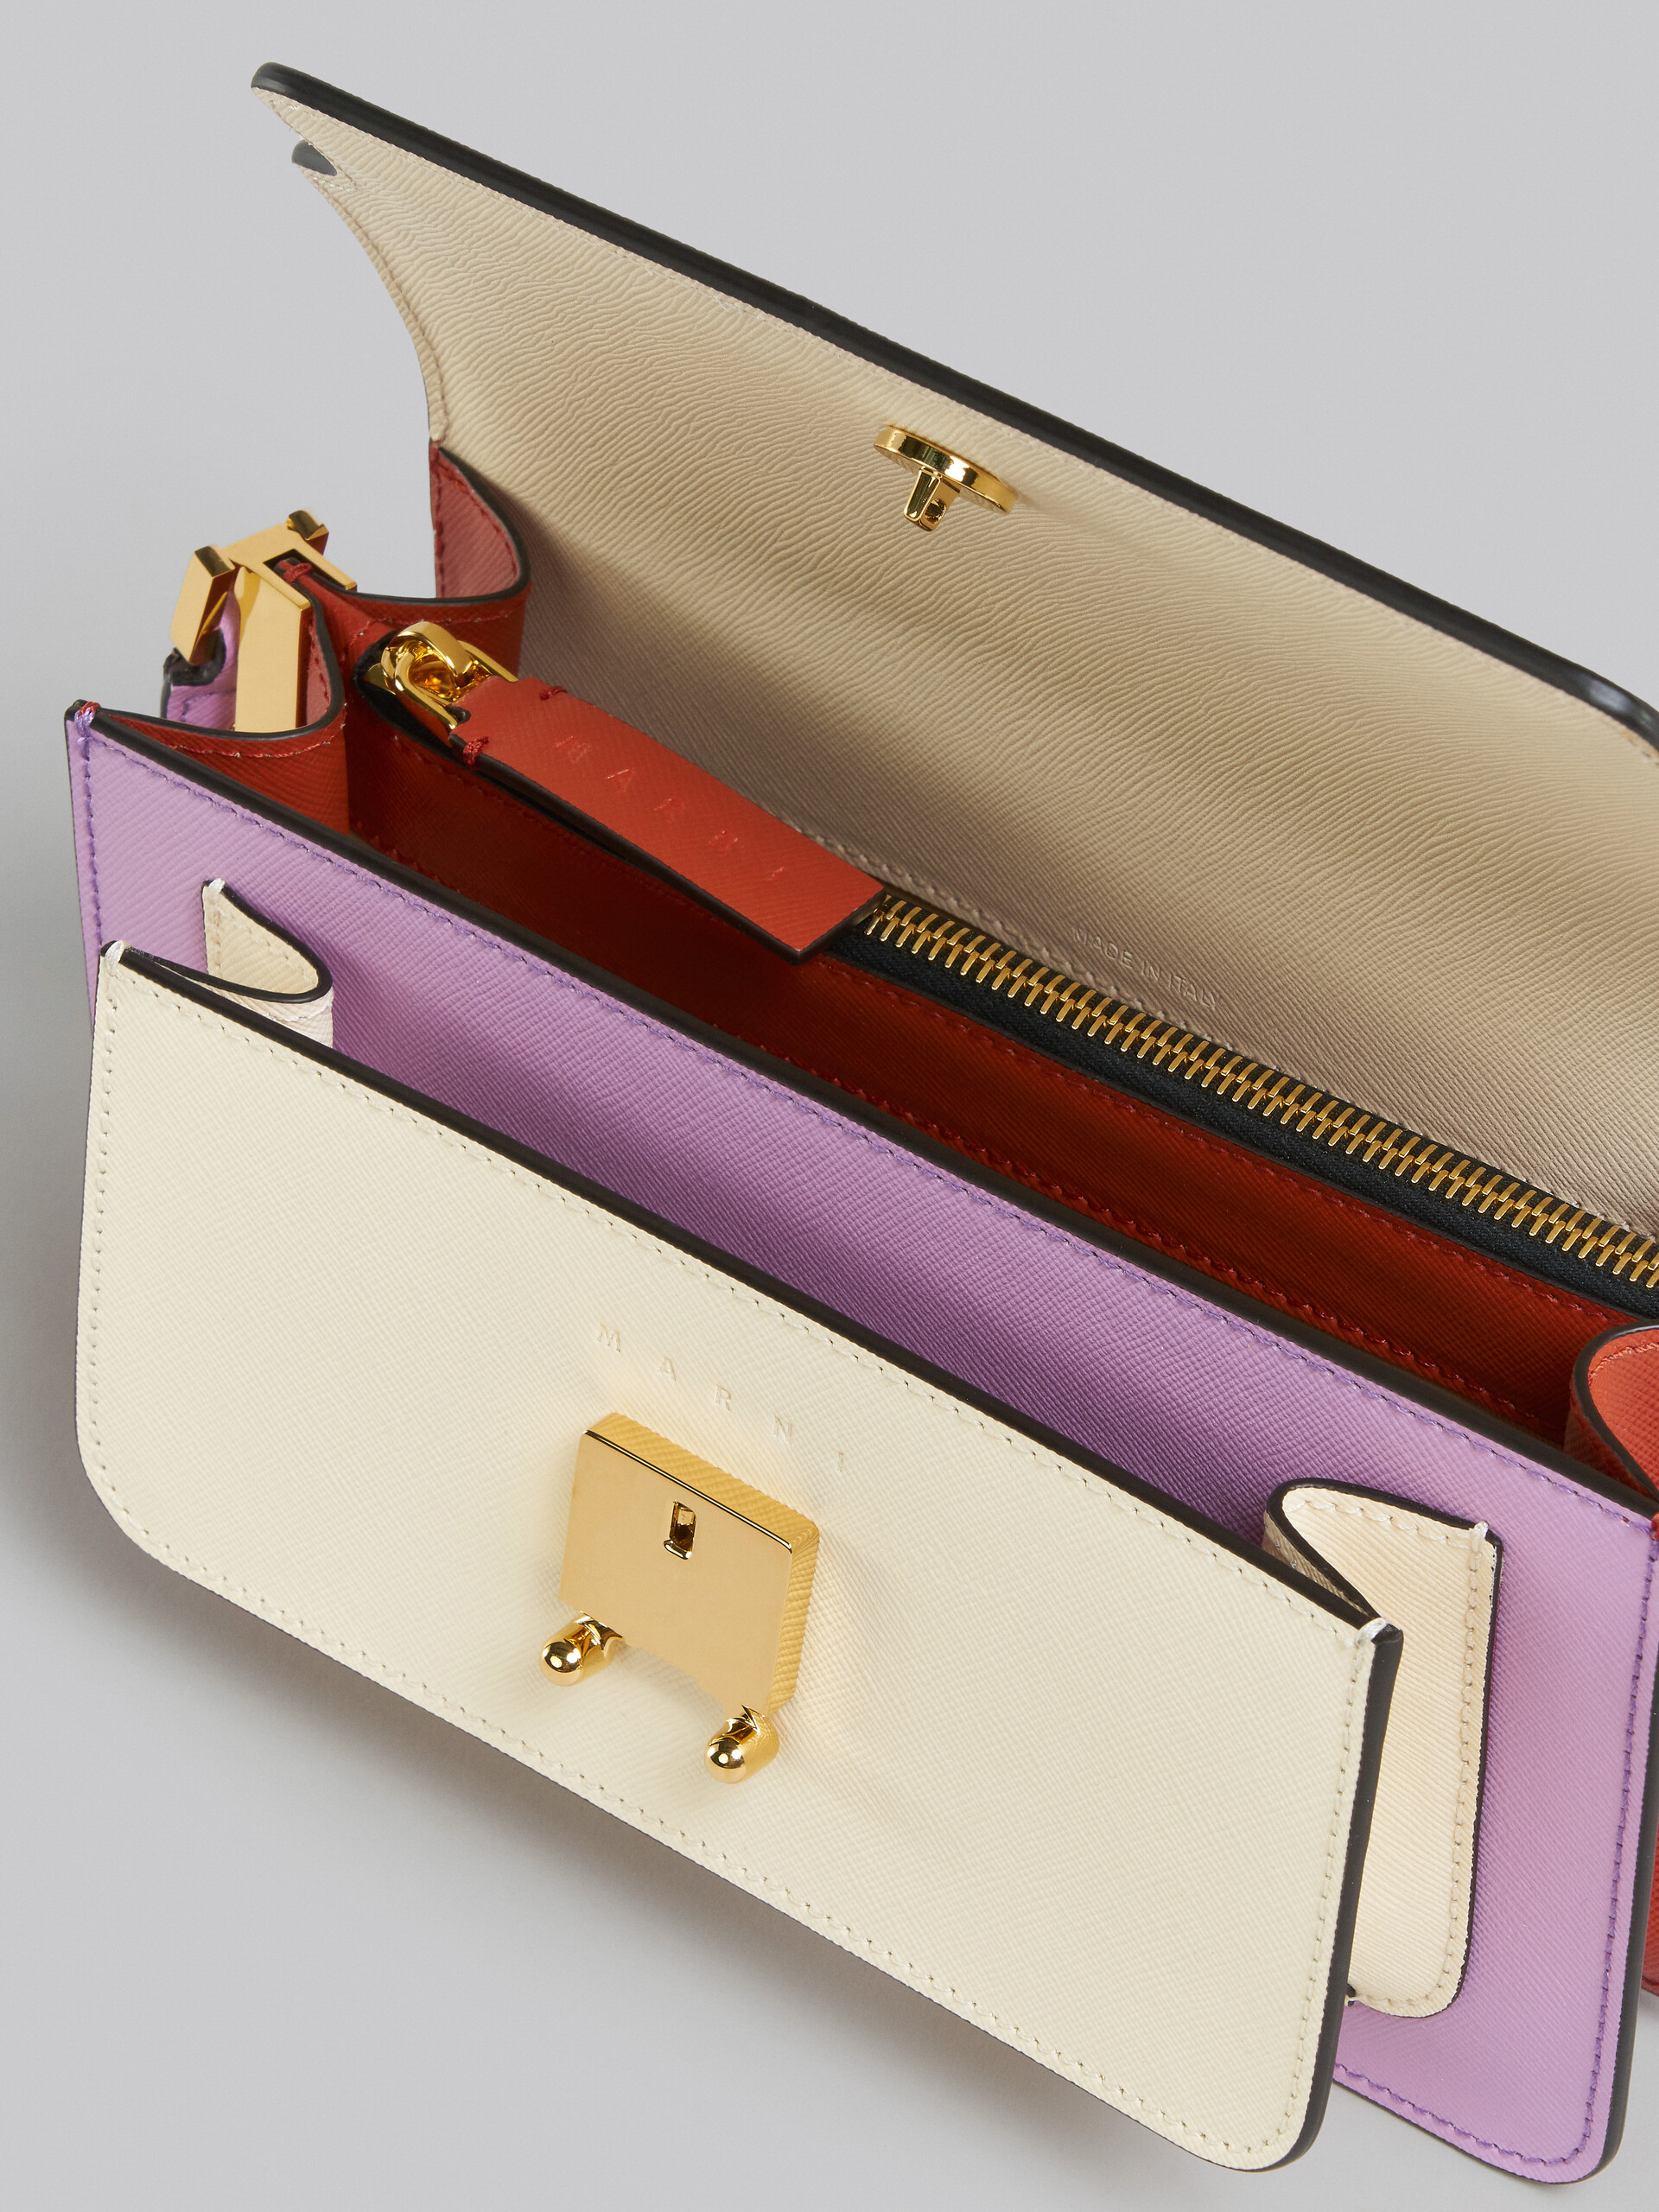 The Marni Trunk Bag  An everyday classic in a light lilac